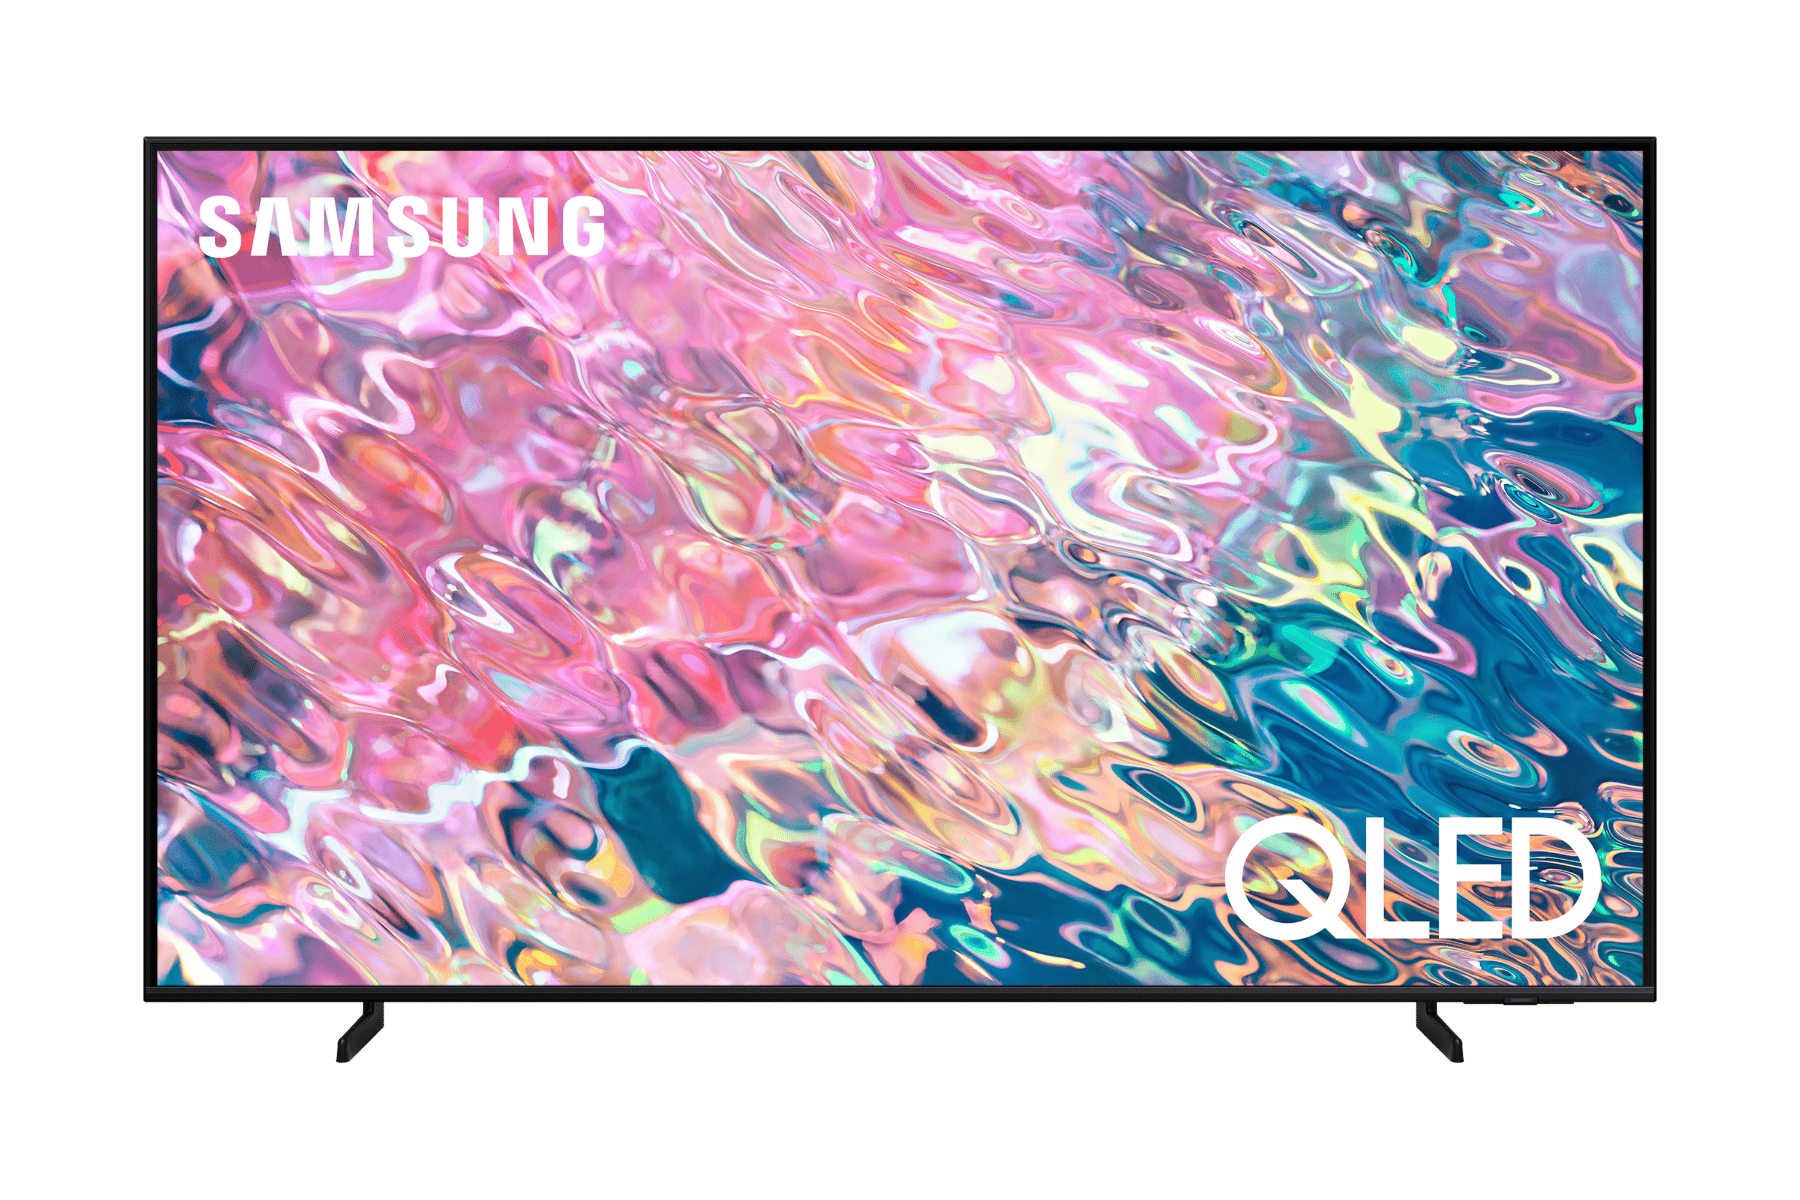 Samsung 85 Inch 4K UHD Smart QLED TV with Built-in Receiver - 85Q60CA